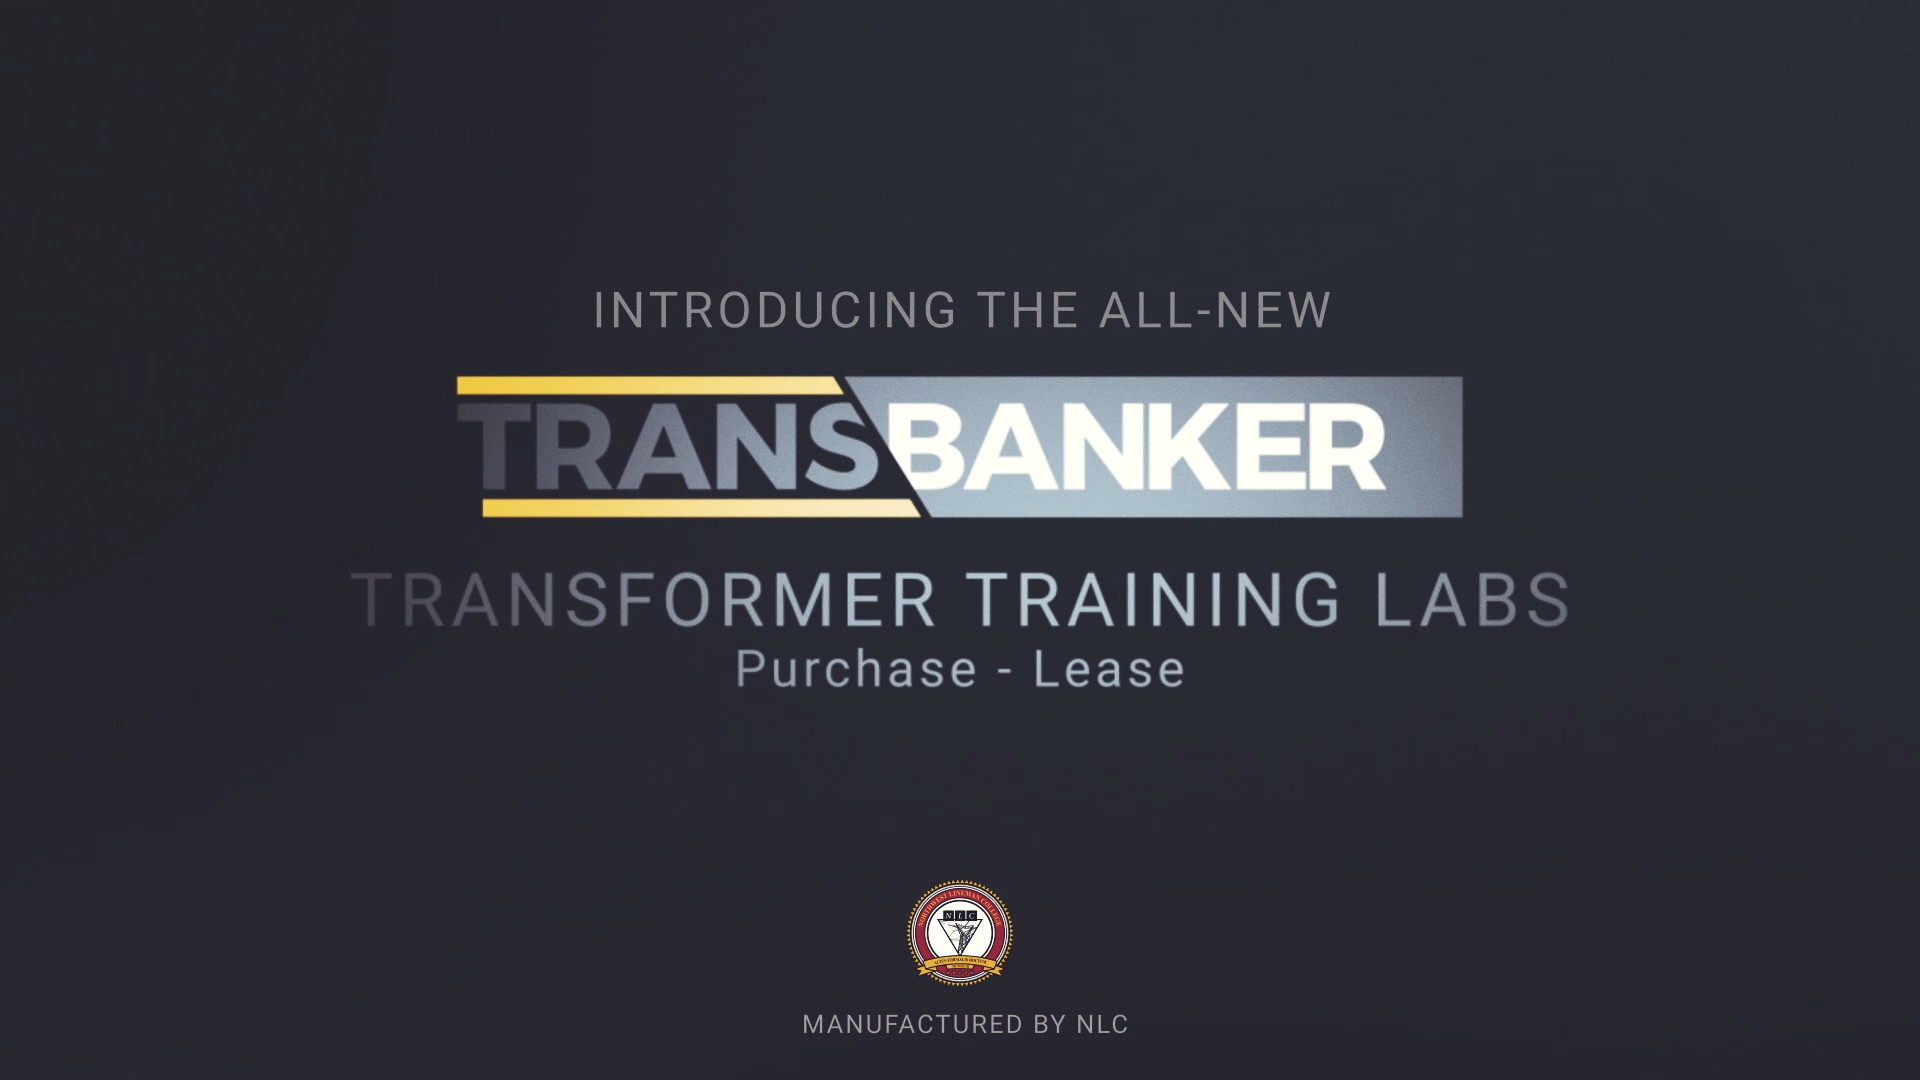 Transbanker Training Labs Product Overview